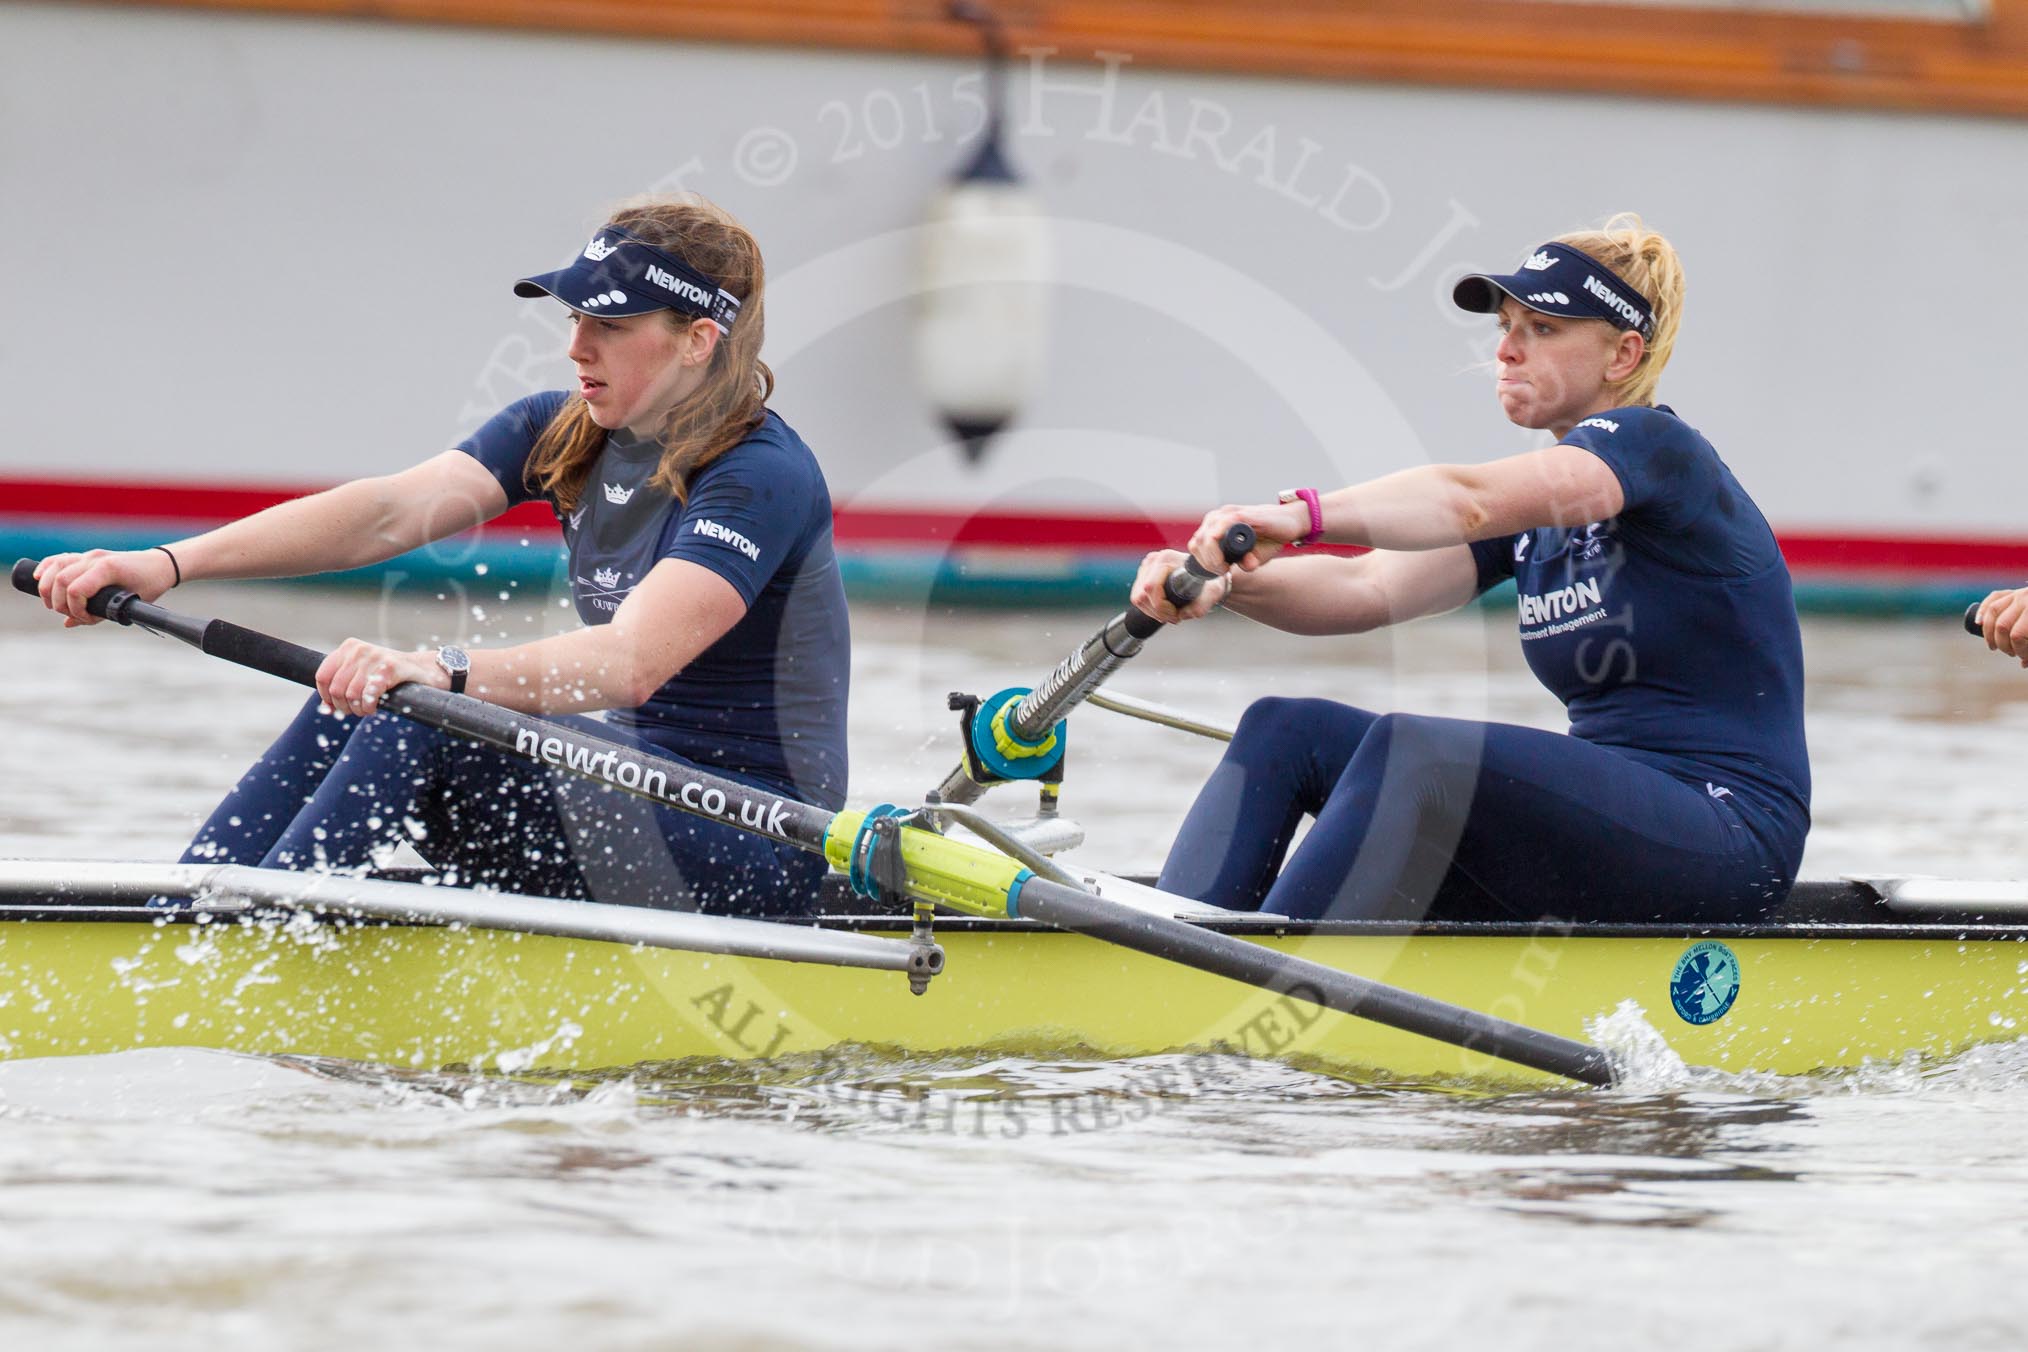 The Boat Race season 2016 - Women's Boat Race Trial Eights (OUWBC, Oxford): "Charybdis", here 5-Ruth Siddorn, 4-Emma Spruce.
River Thames between Putney Bridge and Mortlake,
London SW15,

United Kingdom,
on 10 December 2015 at 12:18, image #148